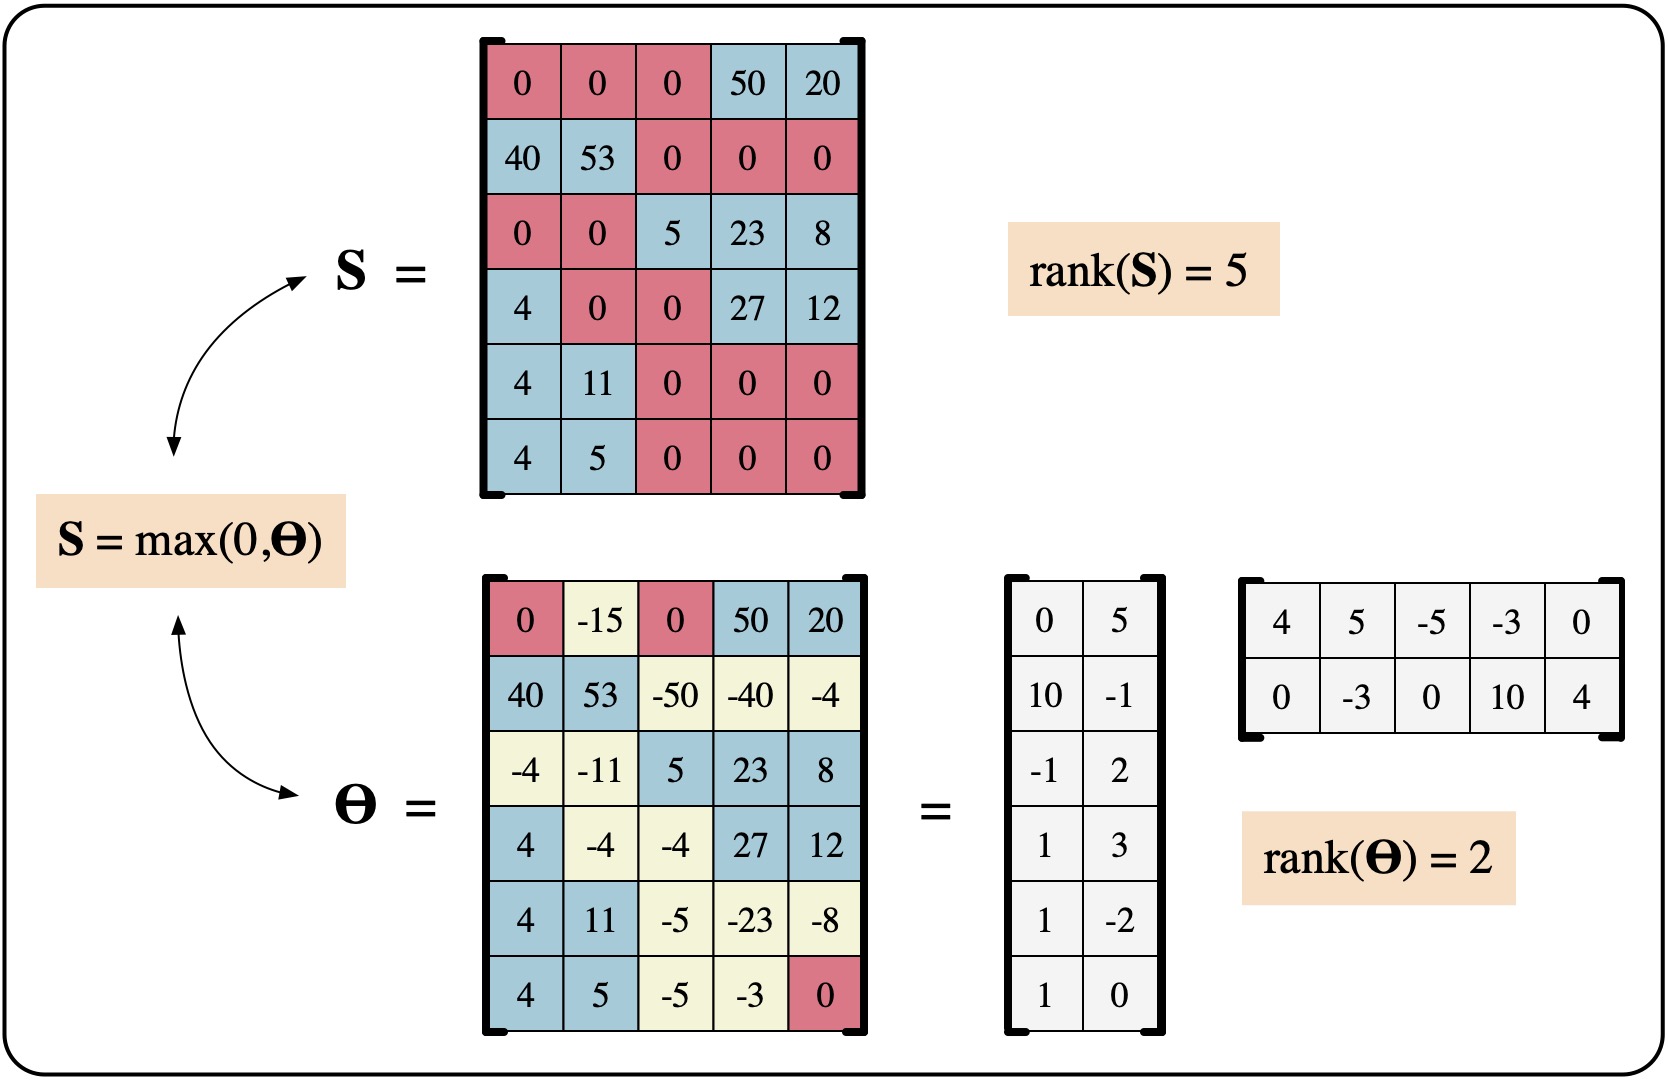 A sparse nonnegative matrix <b>S</b> can often be recovered from a matrix <b>Θ</b> of much lower
                        rank by replacing the zeros of <b>S</b> with strategically chosen negative values, such that
                        <b>S</b>=max(0,<b>Θ</b>).